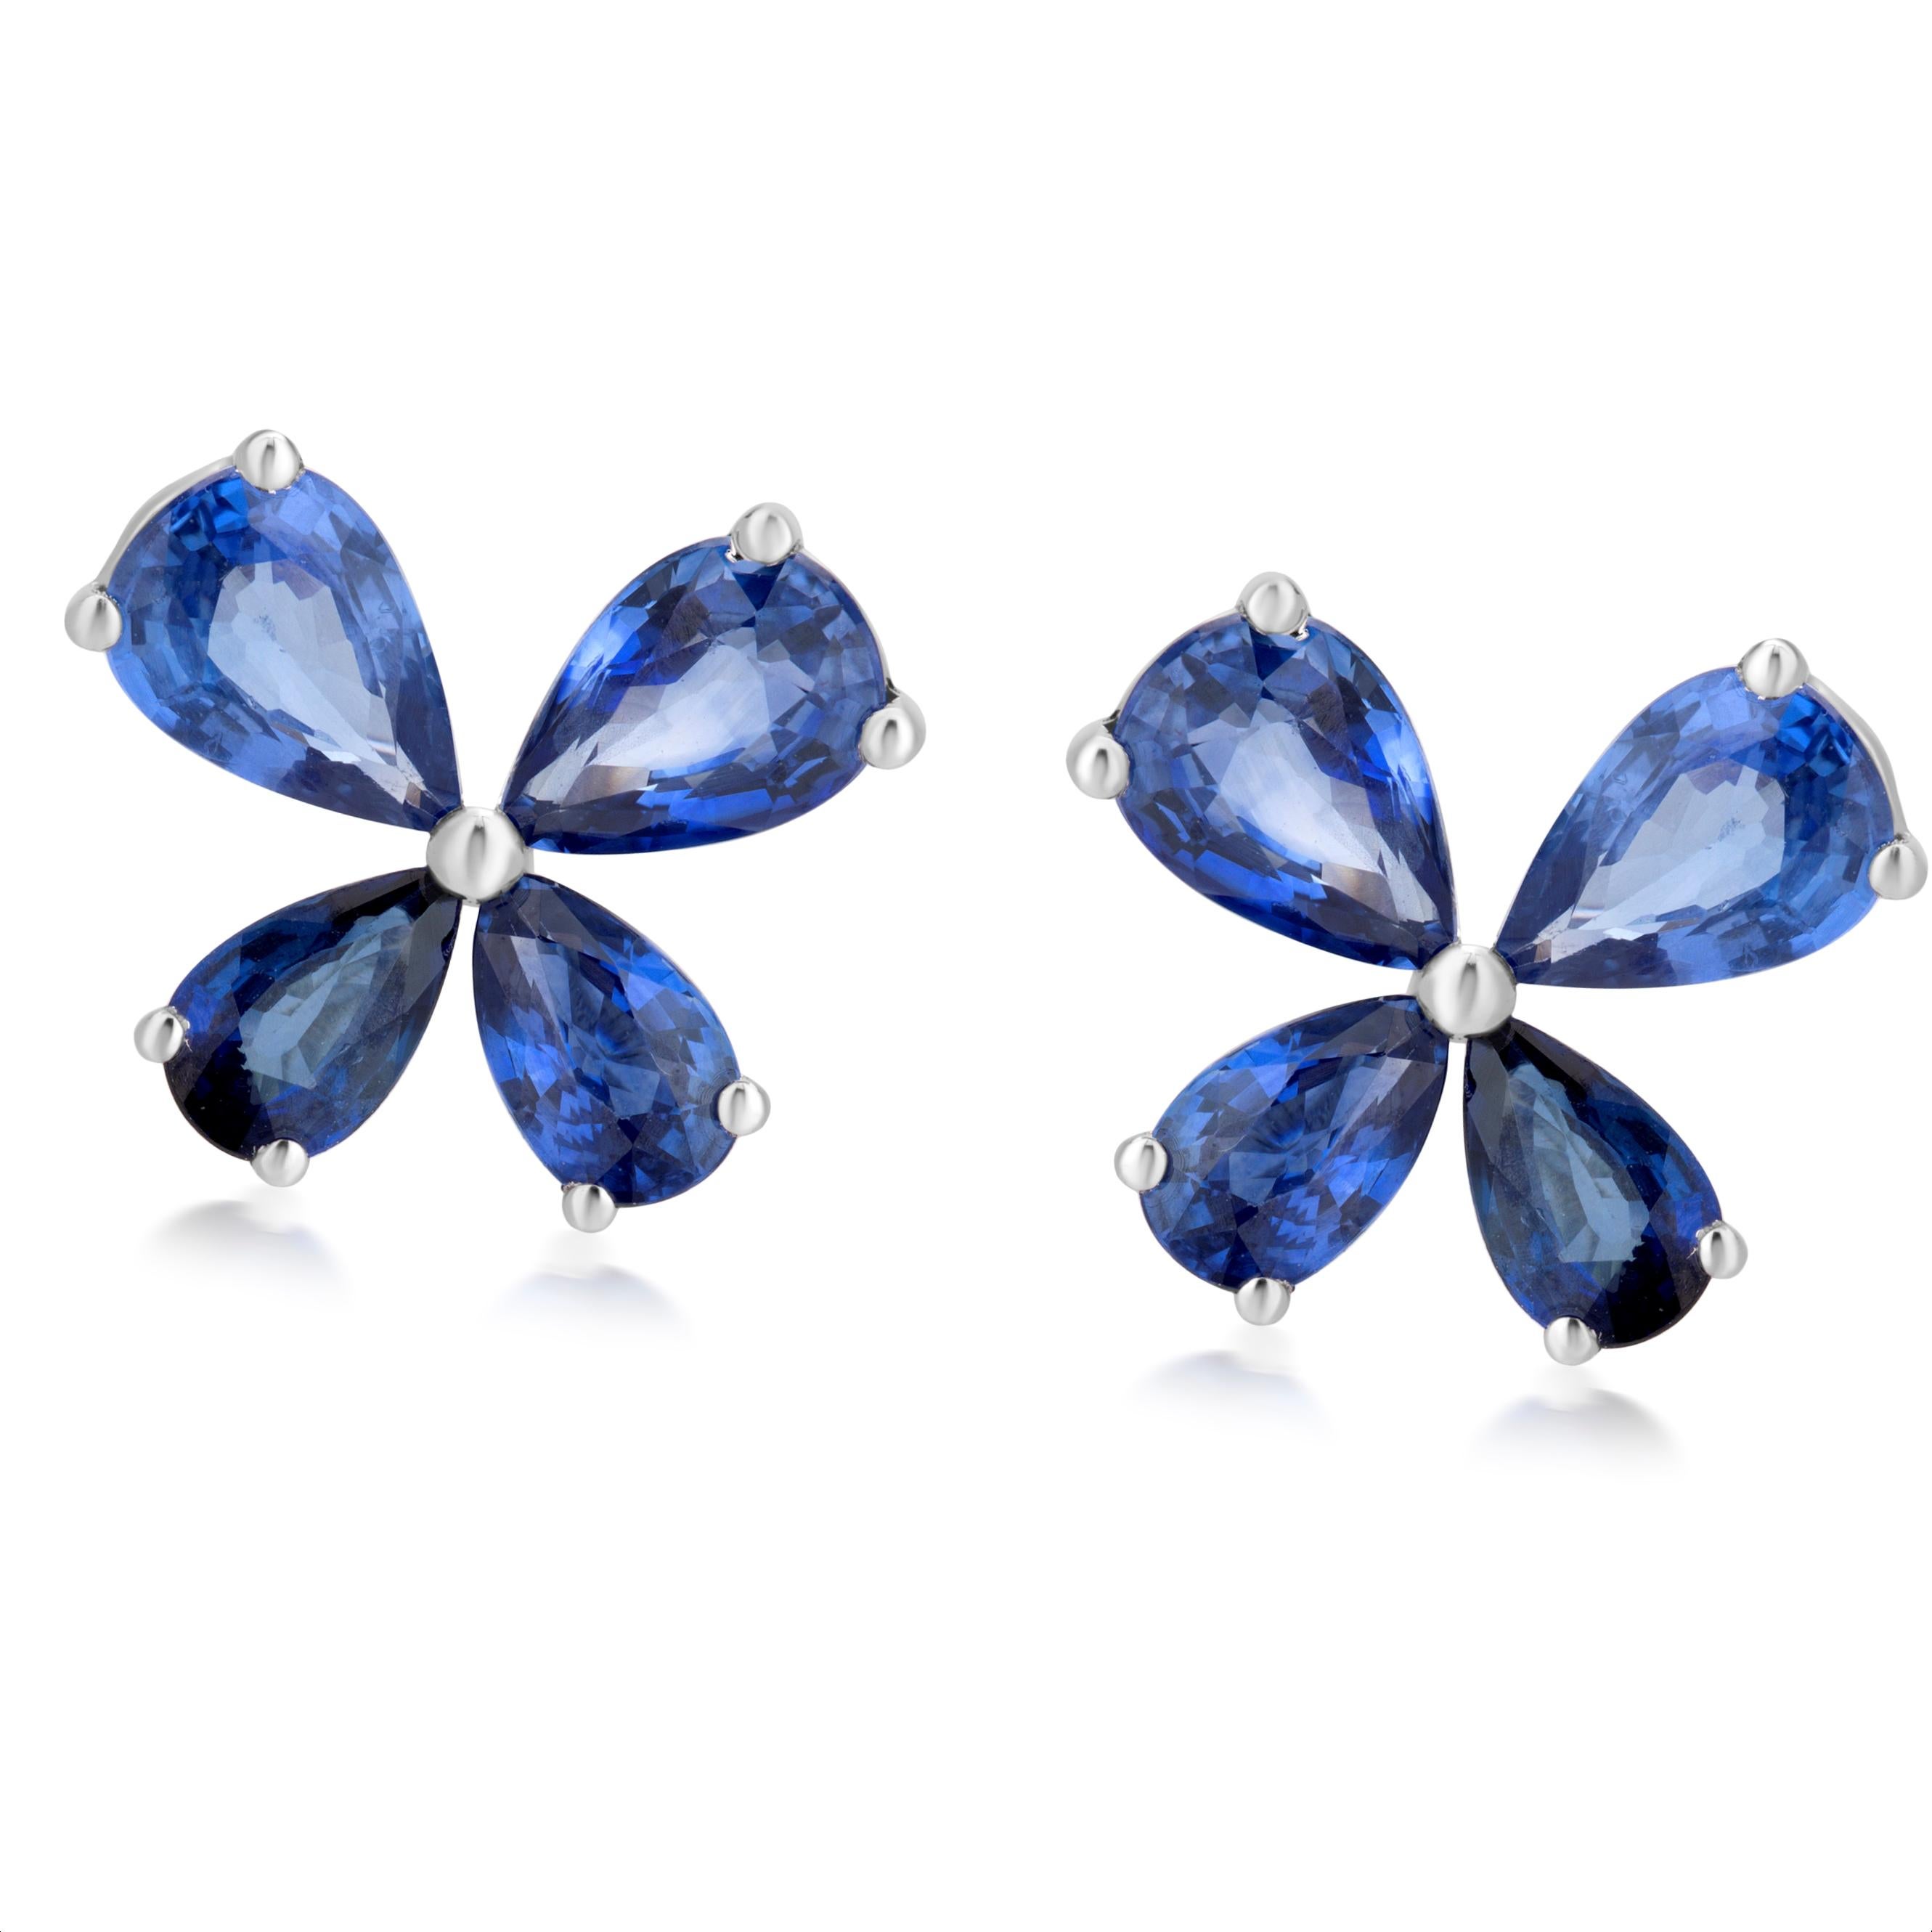 Pear Cut Gemistry 3.45 Cttw. Blue Sapphire Floral Stud Earrings in 18k White Gold For Sale